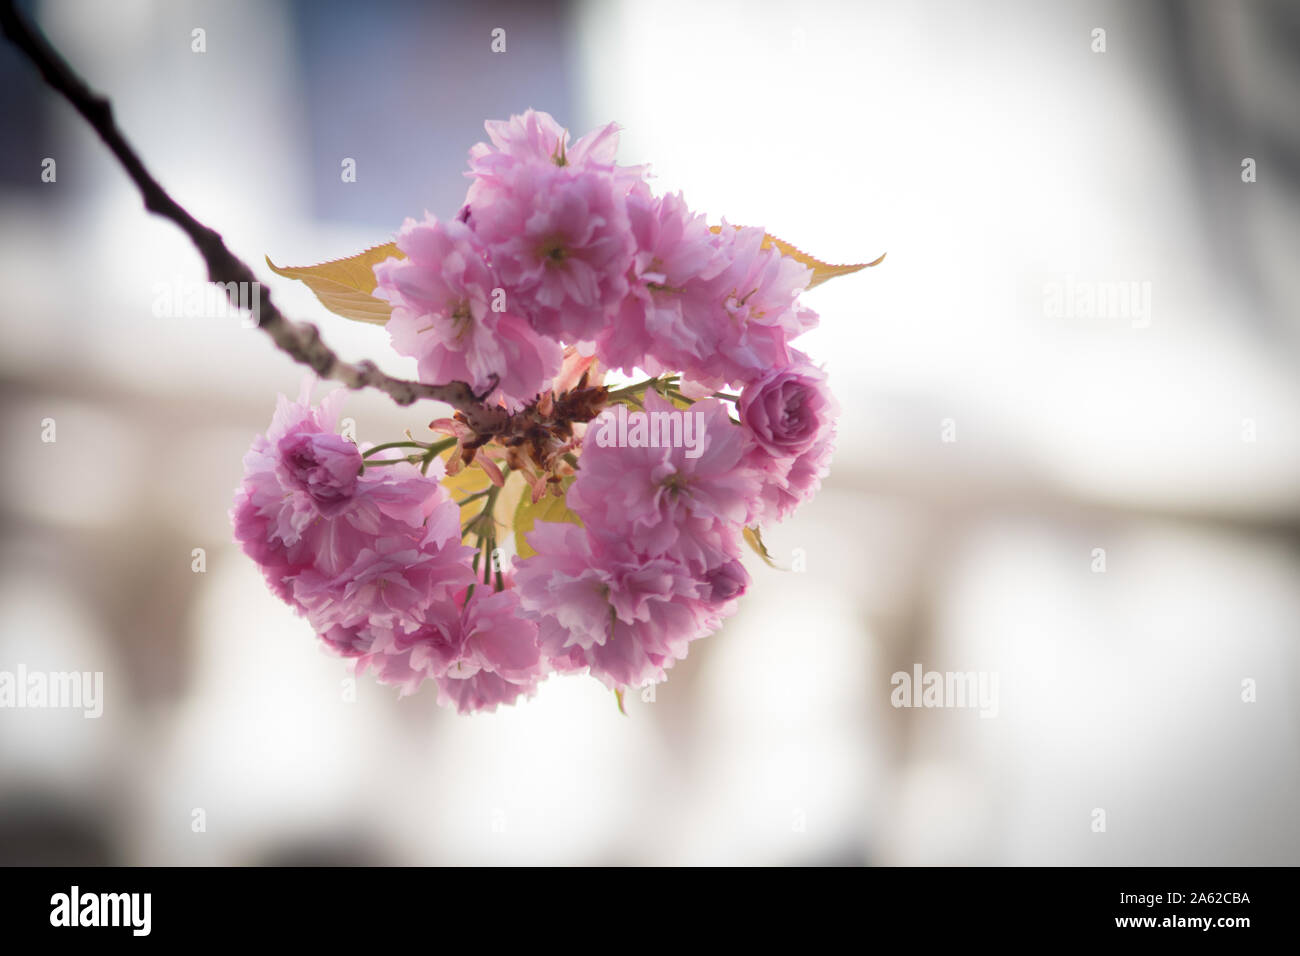 Cherry blossoms in front of a house front. Selective focus. Stock Photo